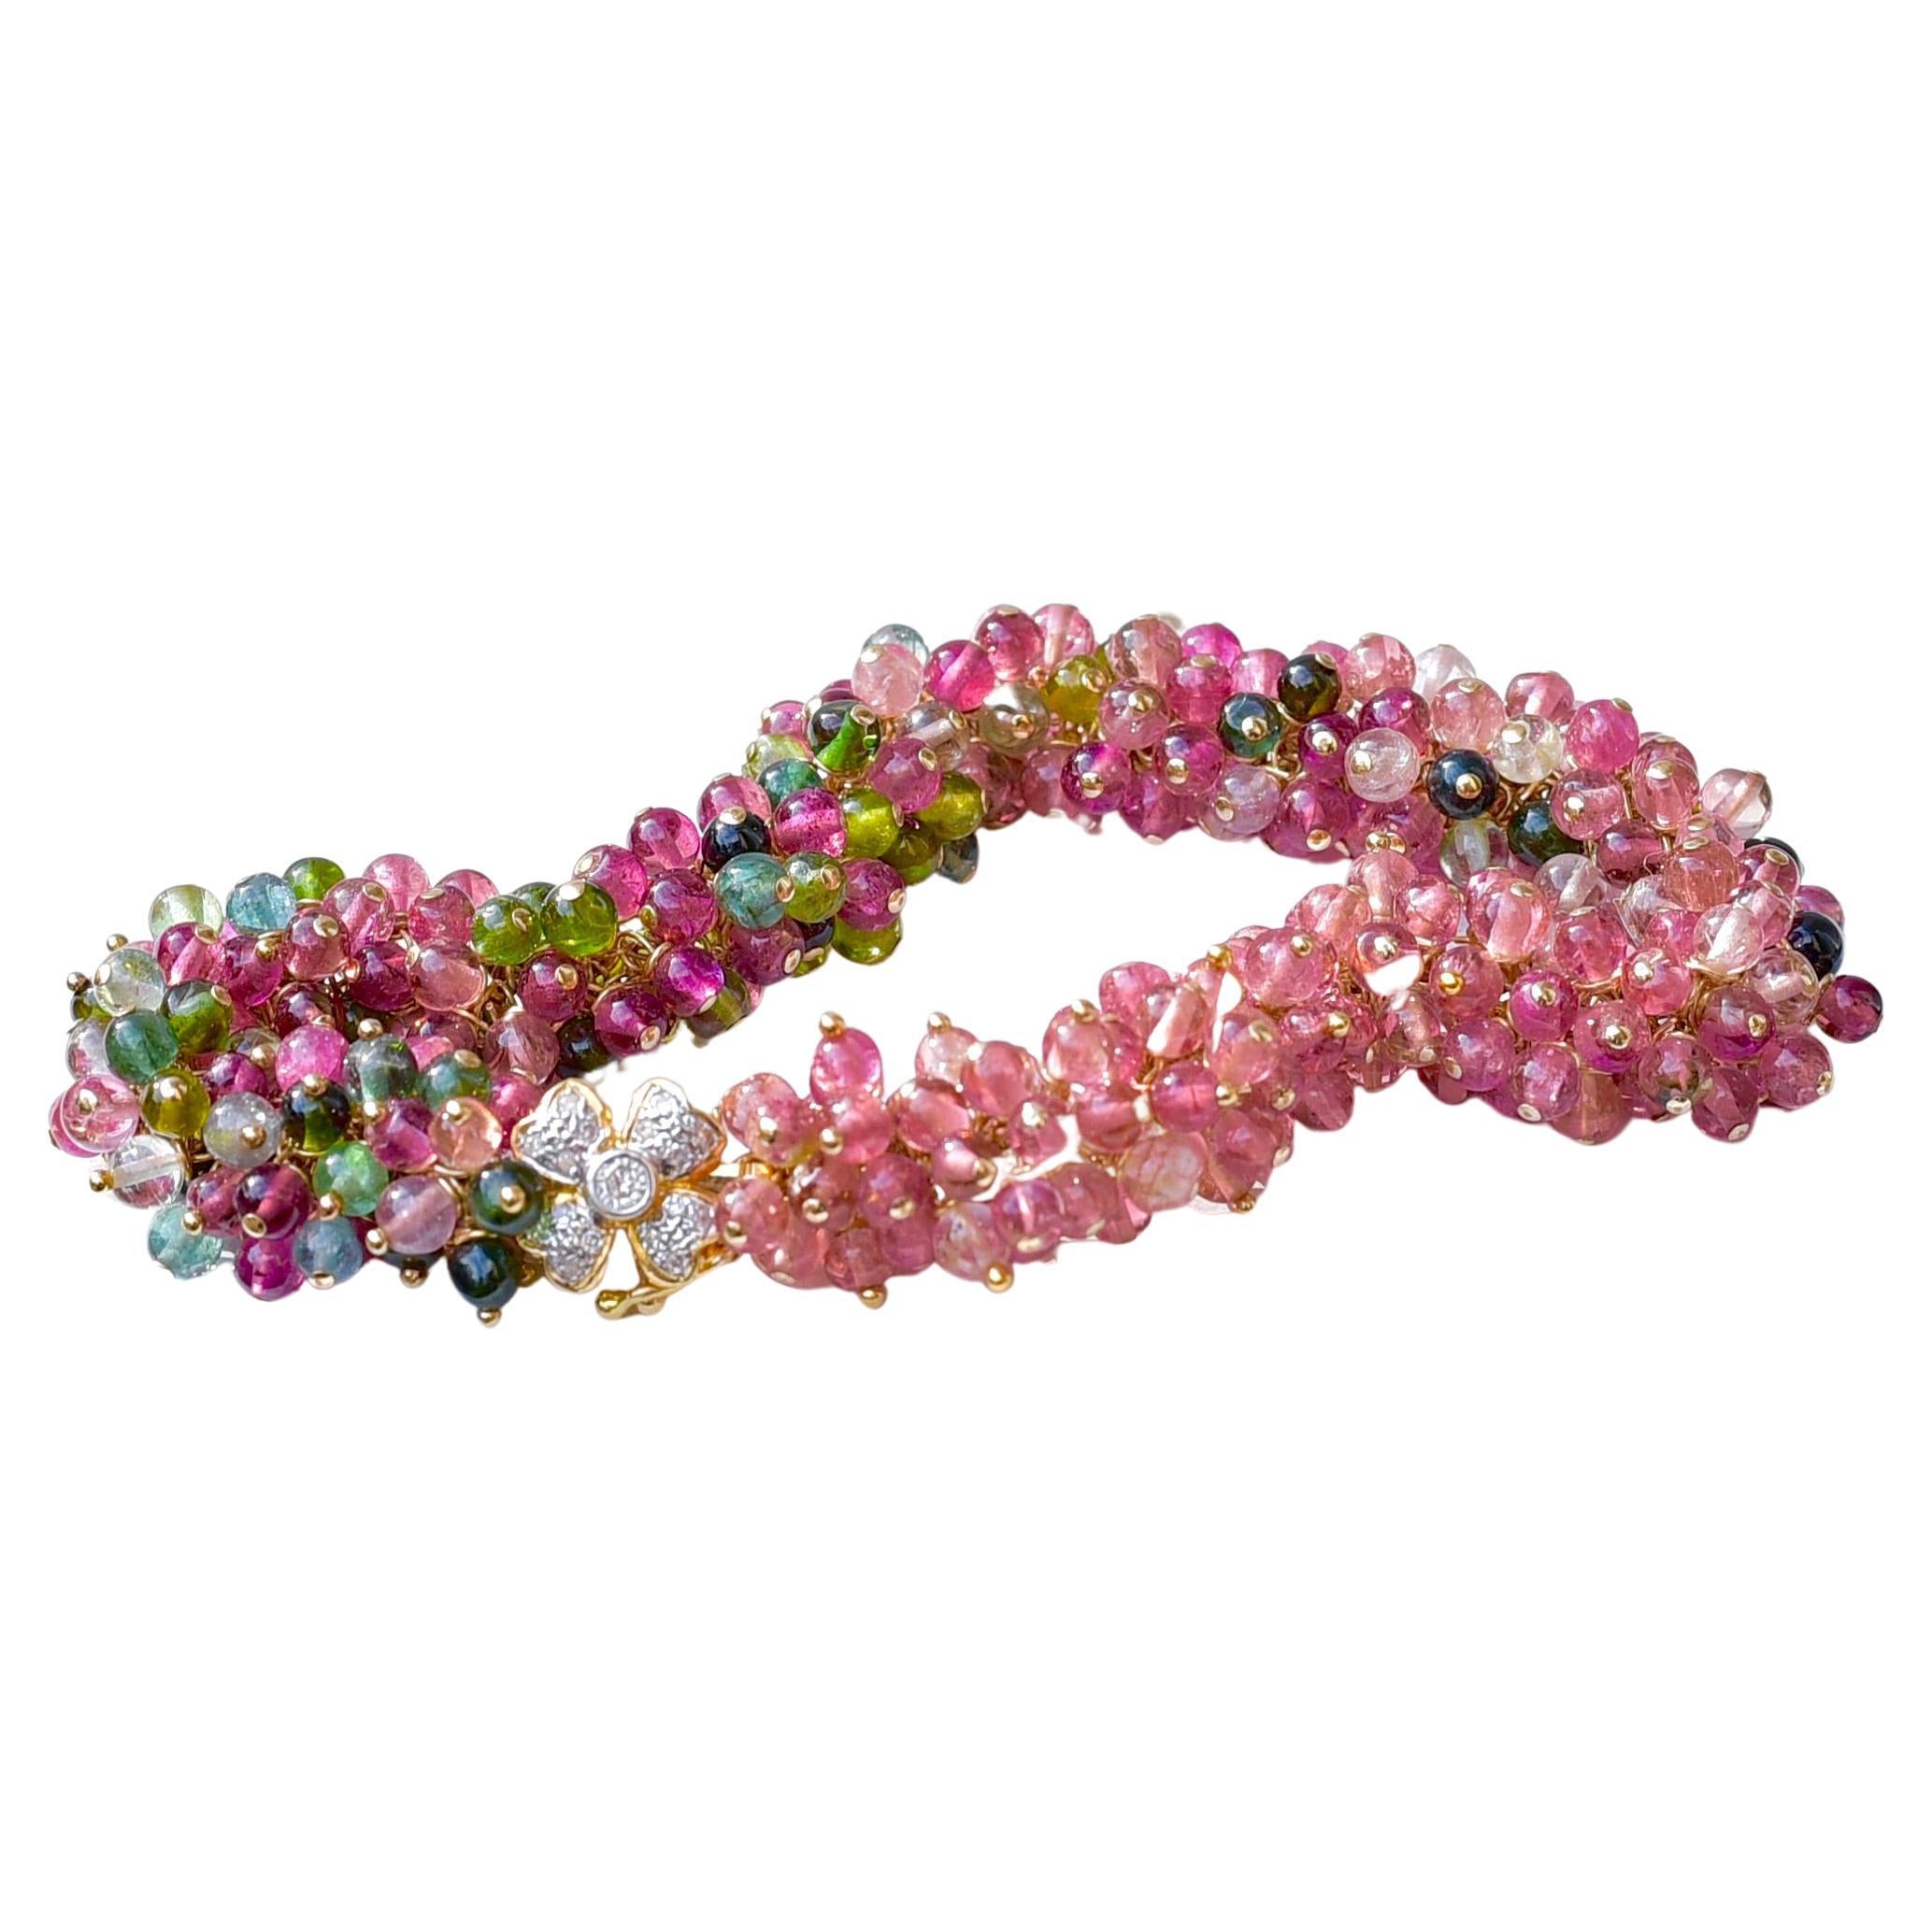 If you love tourmaline – this luxe bracelet wins your heart! Gorgeous pink, green and red tourmaline with 14K Solid Yellow Gold and Diamond Clasp and on the other side of the bracelet more pink tourmalines creates a delicate look. Stunning from